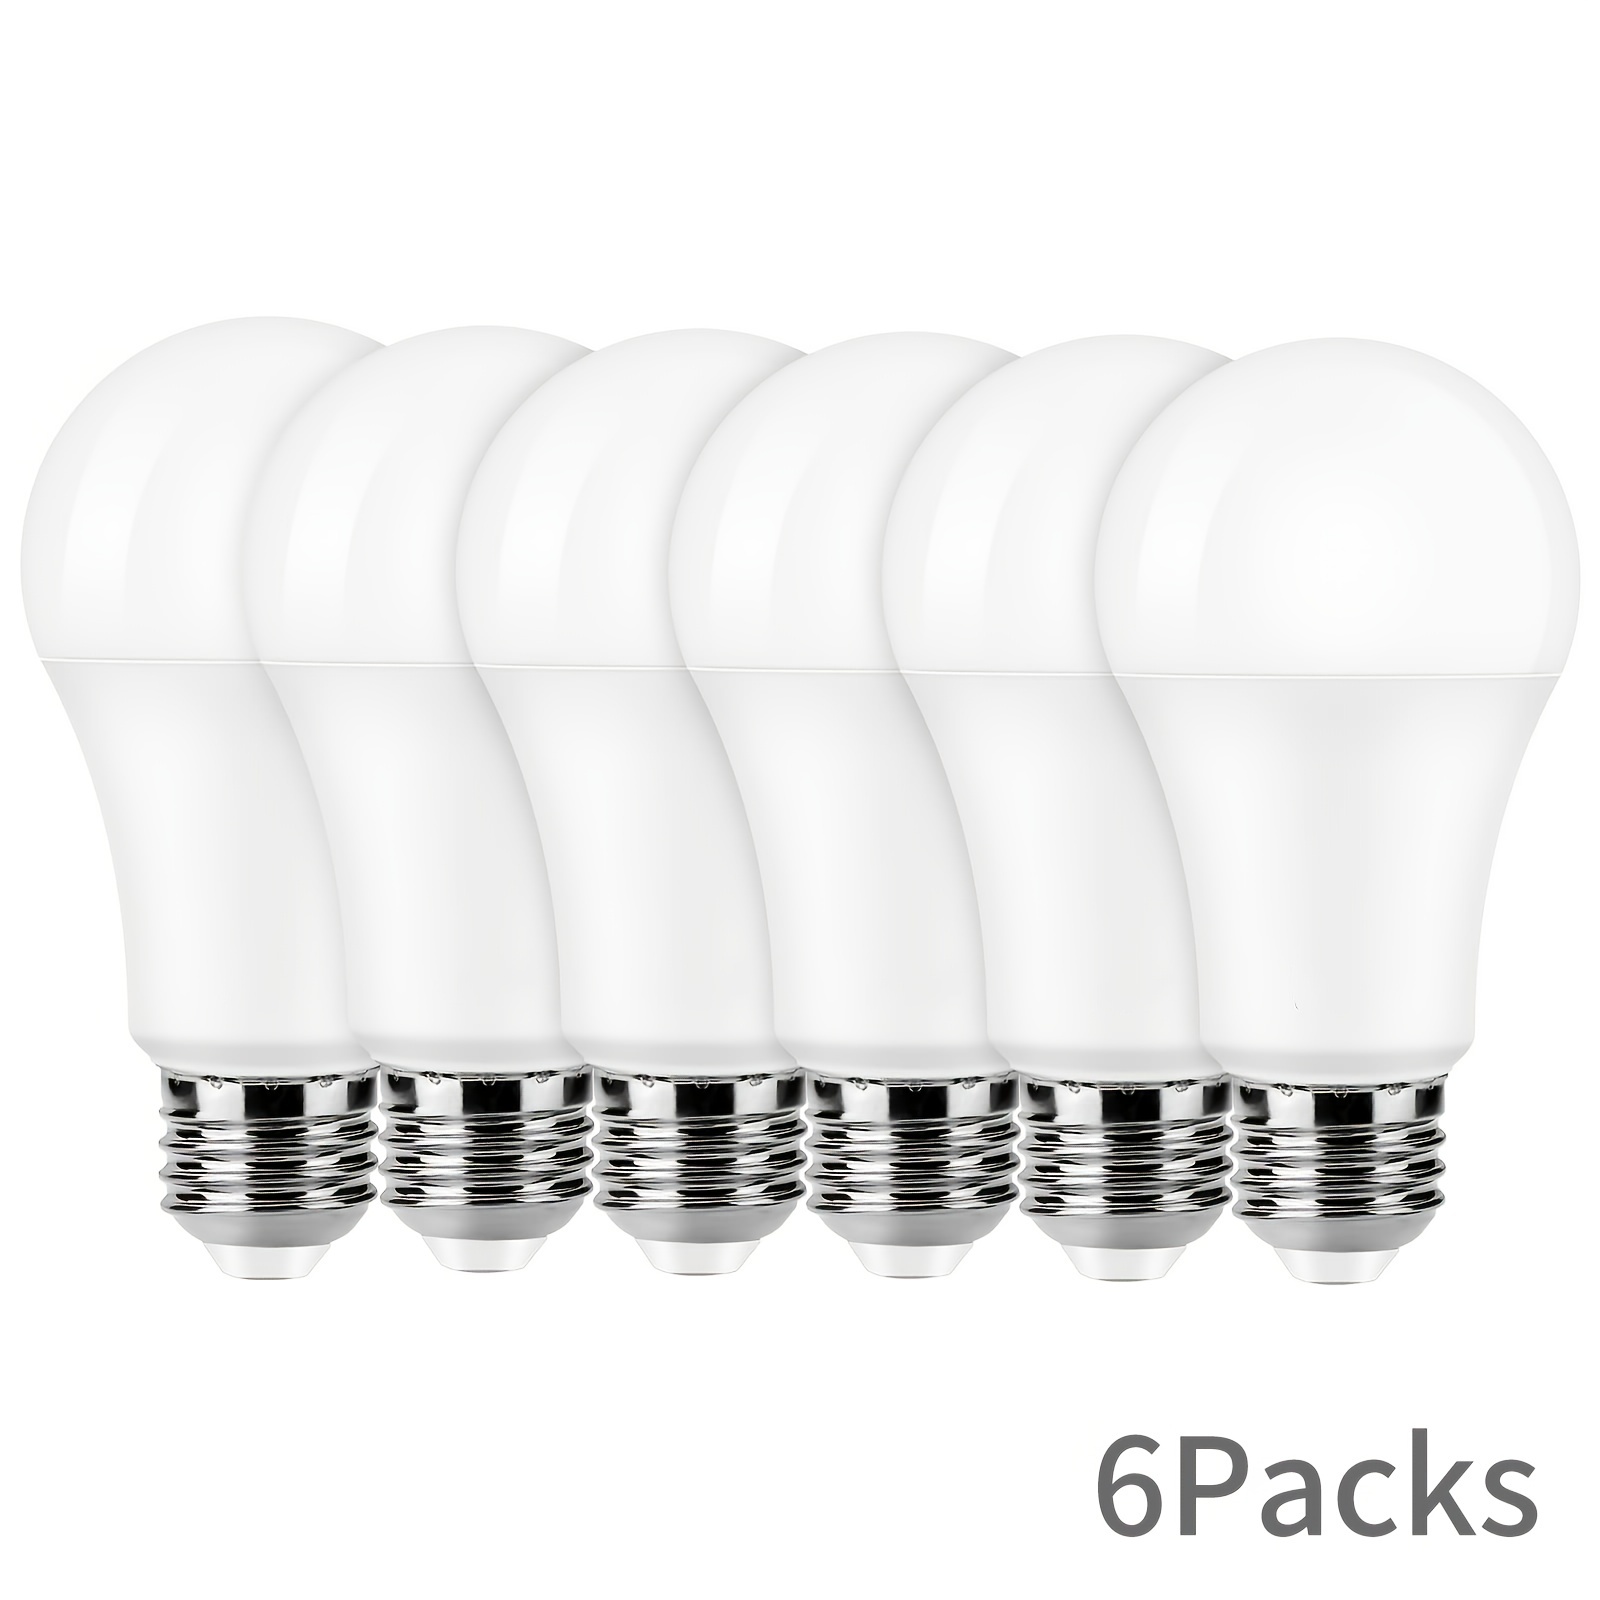 

6 Packs E27 9w Led Bulbs Are Equivalent To 60w Incandescent Lamps, Cold White 6000k Warm White 3000k 900 Lumen Ultra-bright Bulb Lamps Are Applicable To Living Room, Kitchen, Bedroom And Office